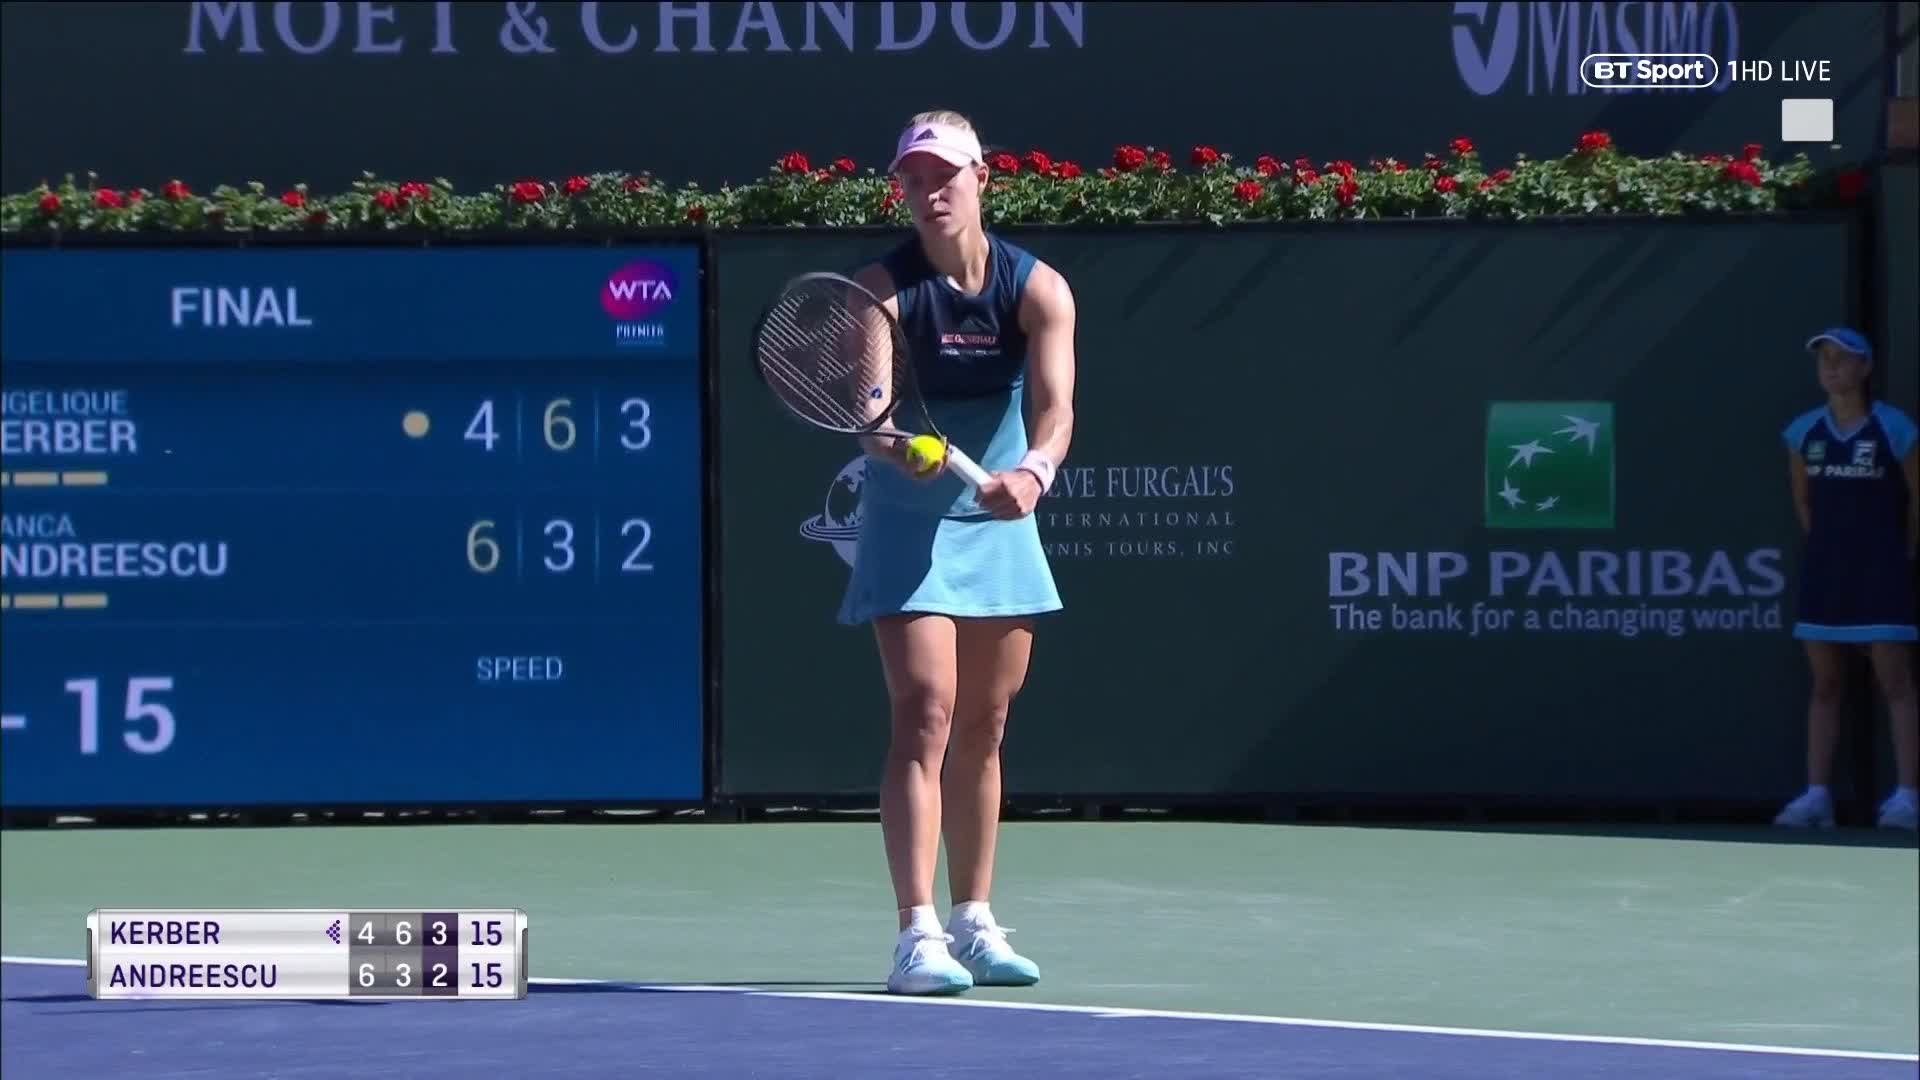 Deltage plasticitet privilegeret BT Sport on Twitter: "Just look at the tennis on show at the #IndianWells  final! 🙌 Bianca Andreescu and Angelique Kerber are playing out a classic  final set on BT Sport 1